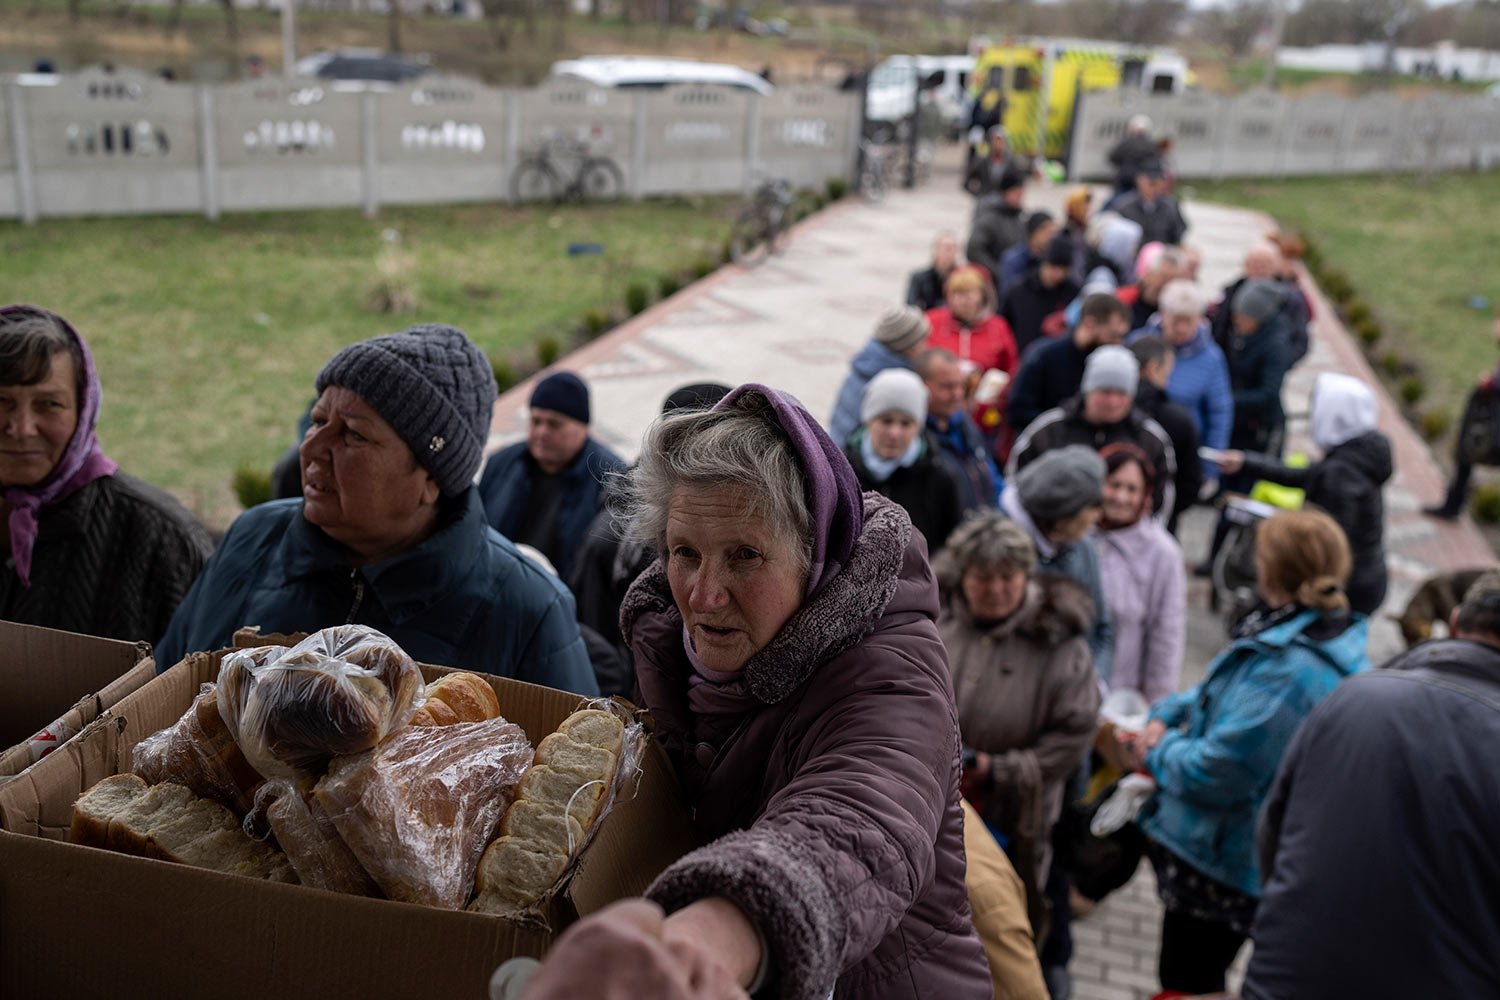  People receive food from a church in the town of Borodyanka, about 40 miles northwest of Kyiv, Ukraine, on Sunday, April 10, 2022. (AP Photo/Petros Giannakouris) 